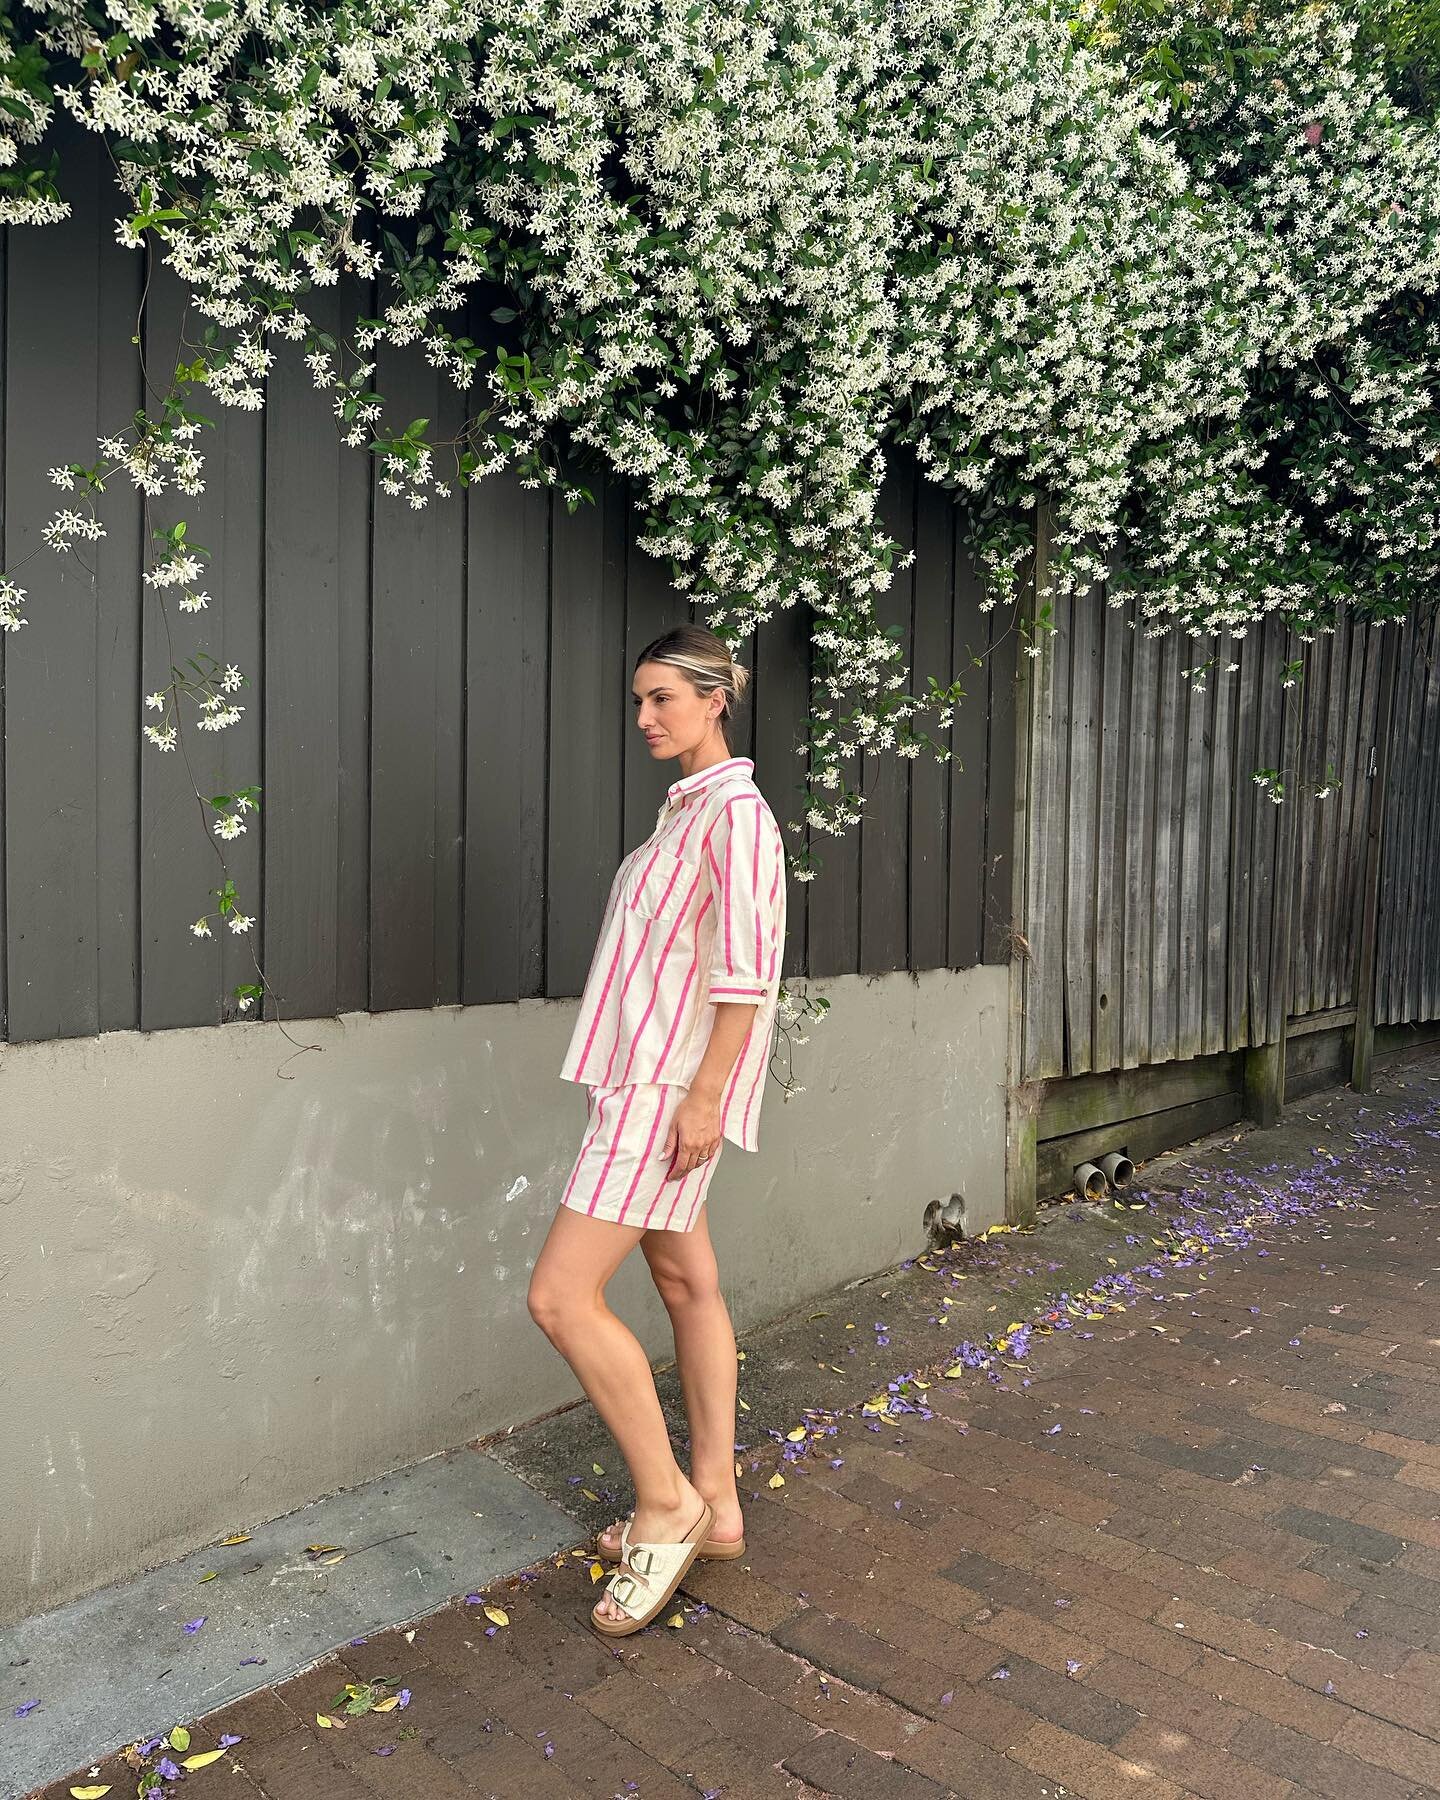 New in set with your outfit
@afd_qld @mfashiontradeonly2 @kolifashionhousewholesale @worldfashionagency #ootd #outfitoftheday #daily #fashionstyle